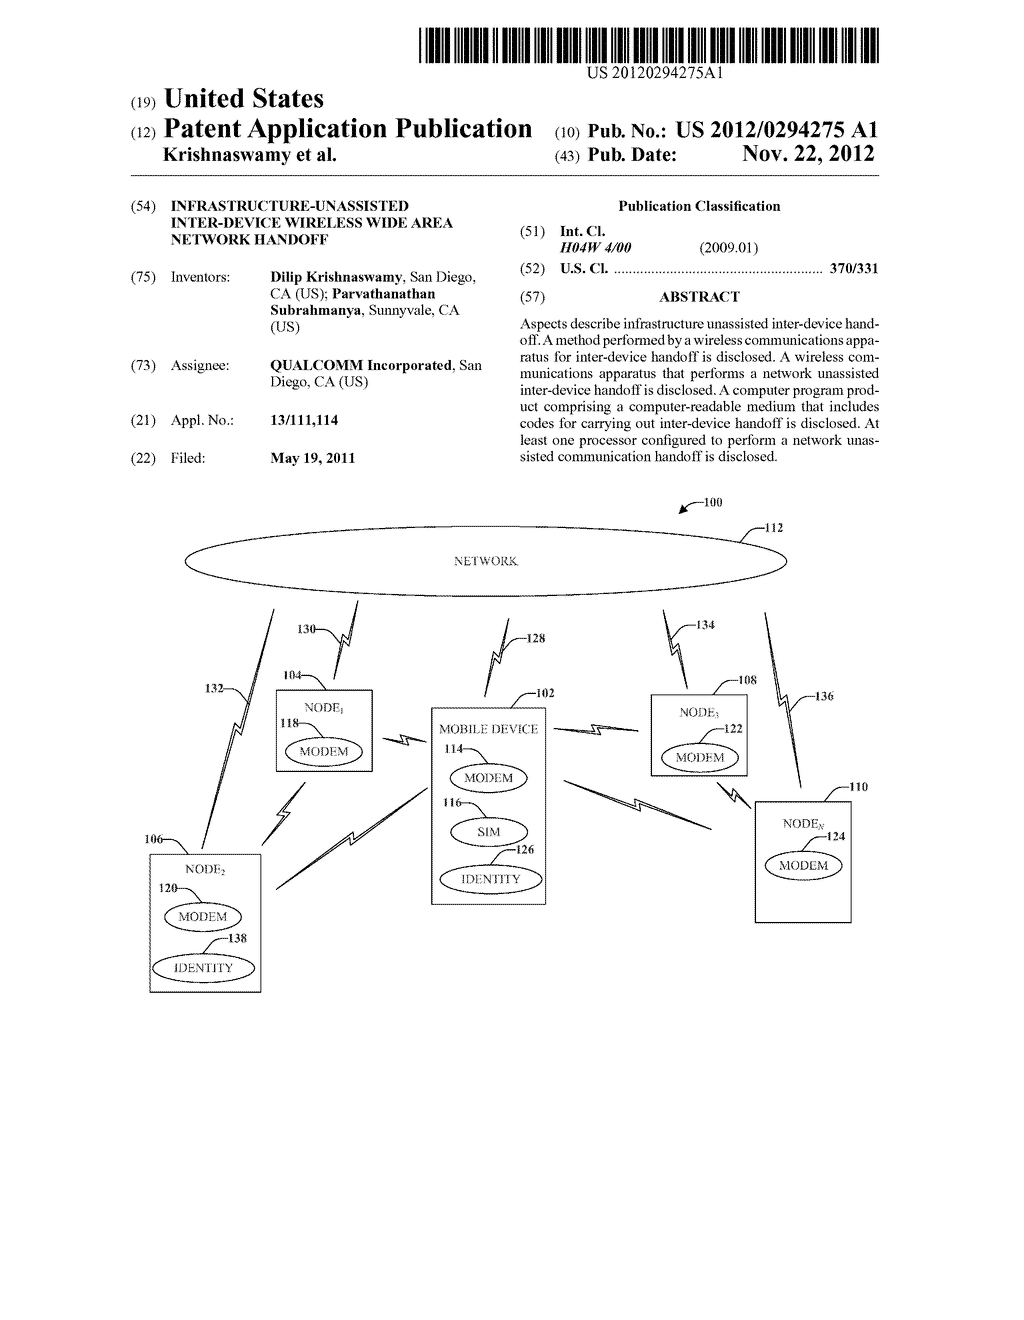 INFRASTRUCTURE-UNASSISTED INTER-DEVICE WIRELESS WIDE AREA NETWORK HANDOFF - diagram, schematic, and image 01